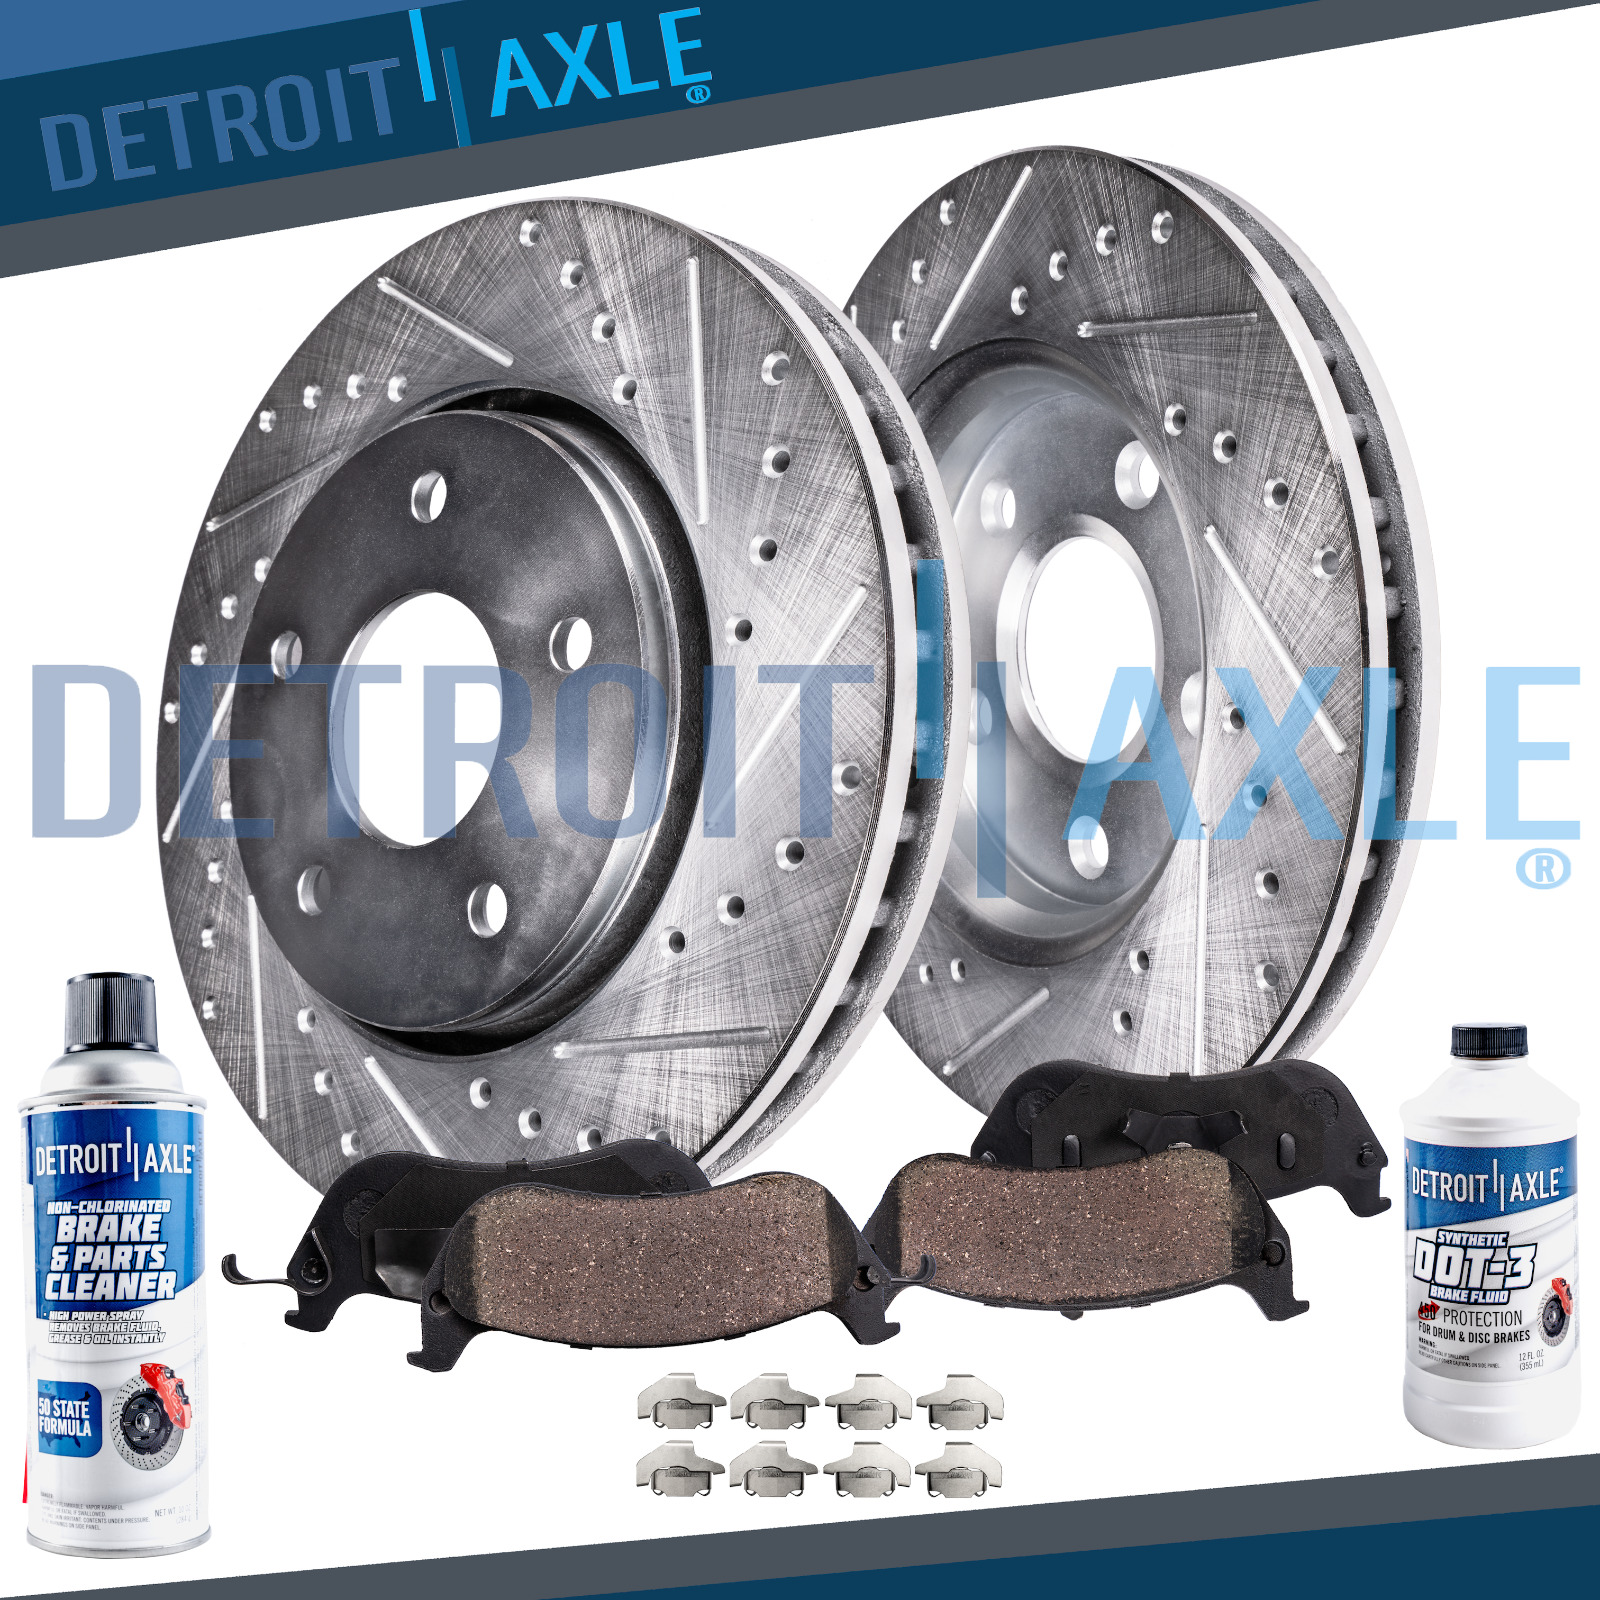 6pc Front Drilled Rotors Brake Pads for Chevy Cavalier Grand Am Sunfire Pontiac